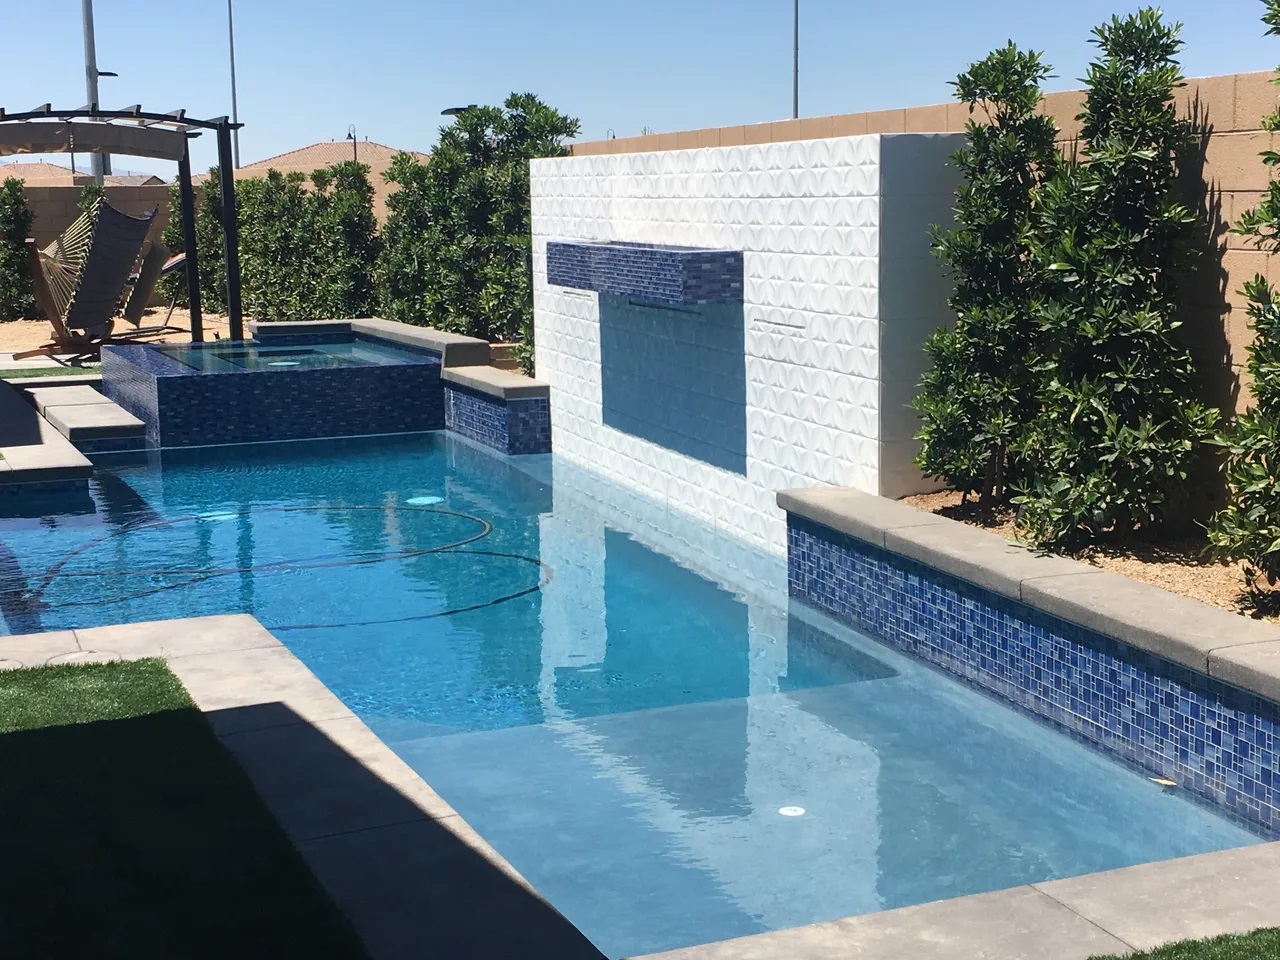 Las Vegas Pools - Building and Completion